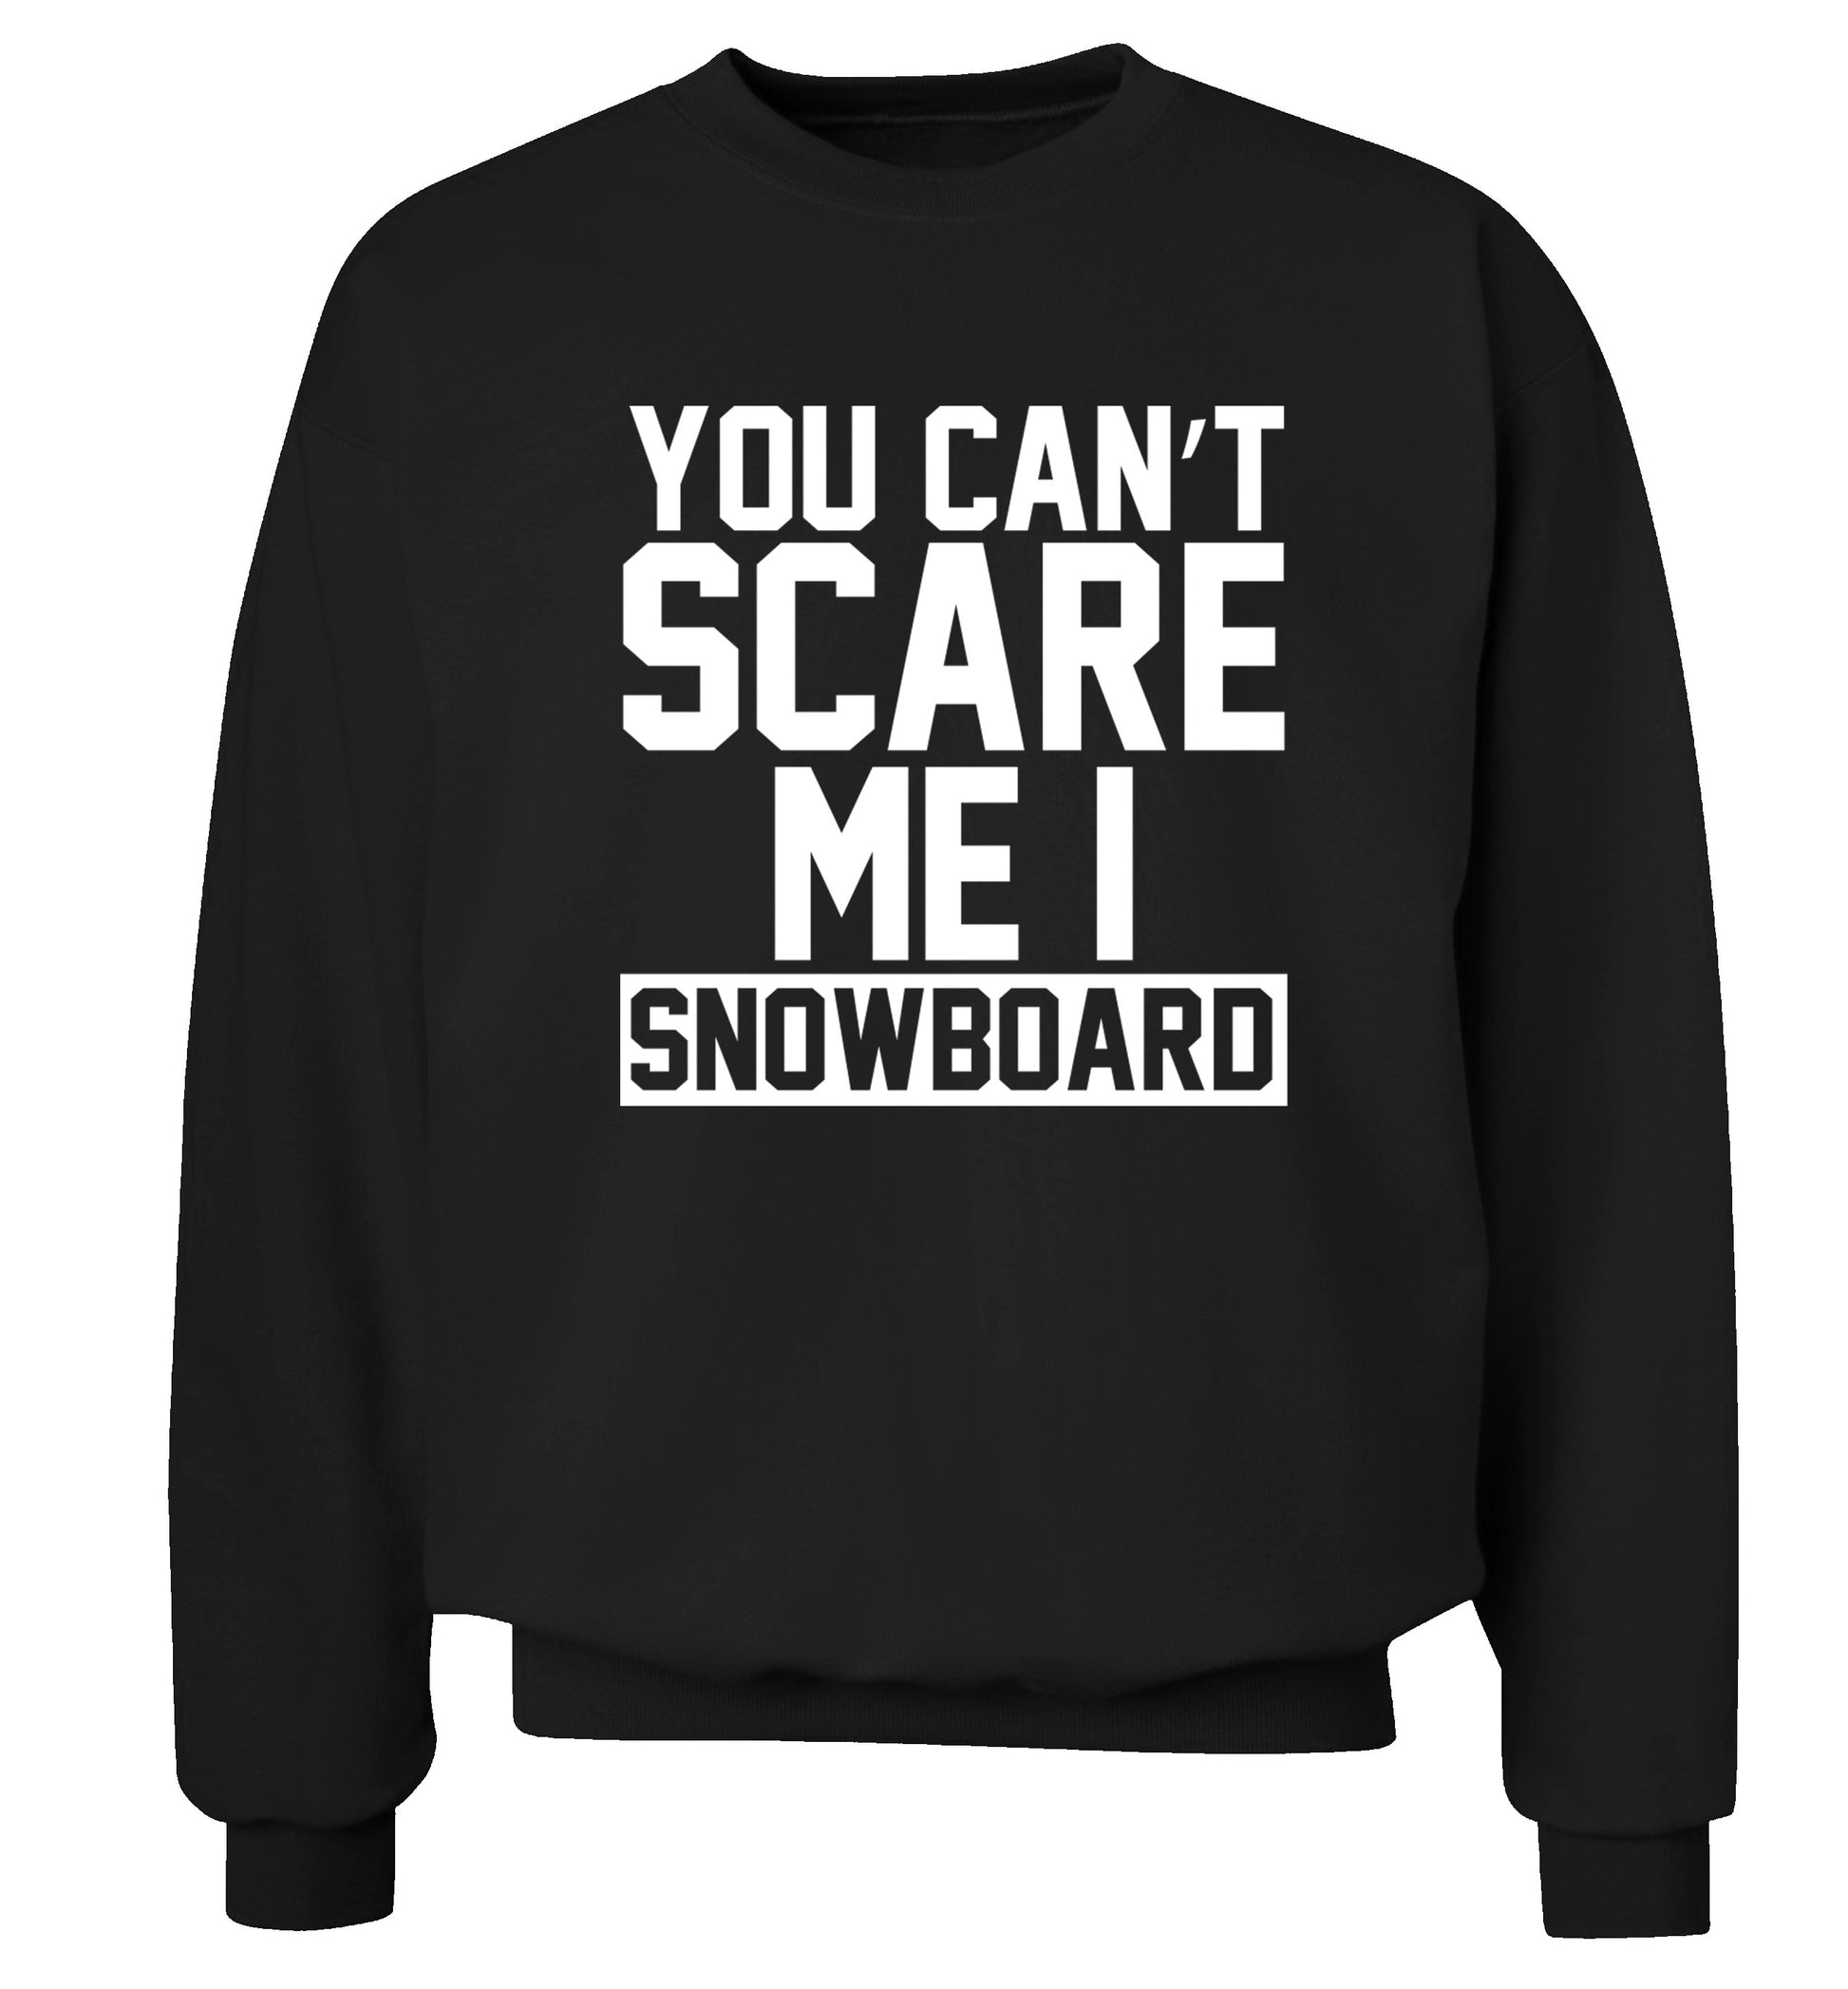 You can't scare me I snowboard Adult's unisex black Sweater 2XL